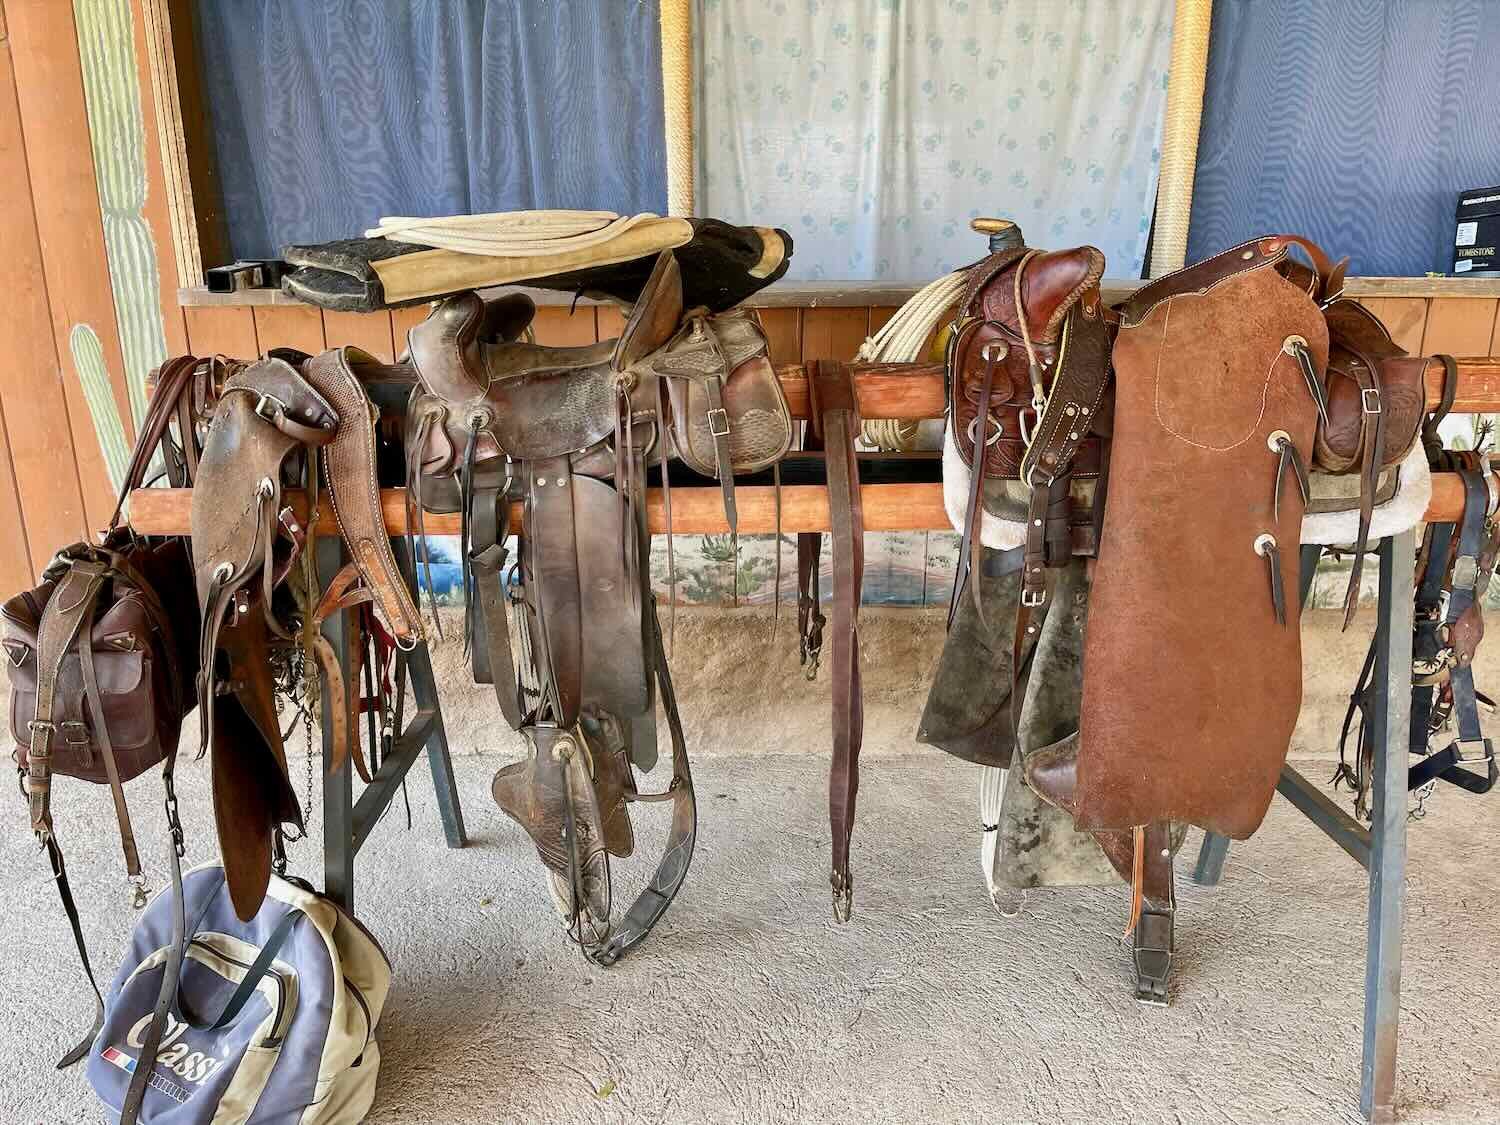 Authentic, well-used saddles